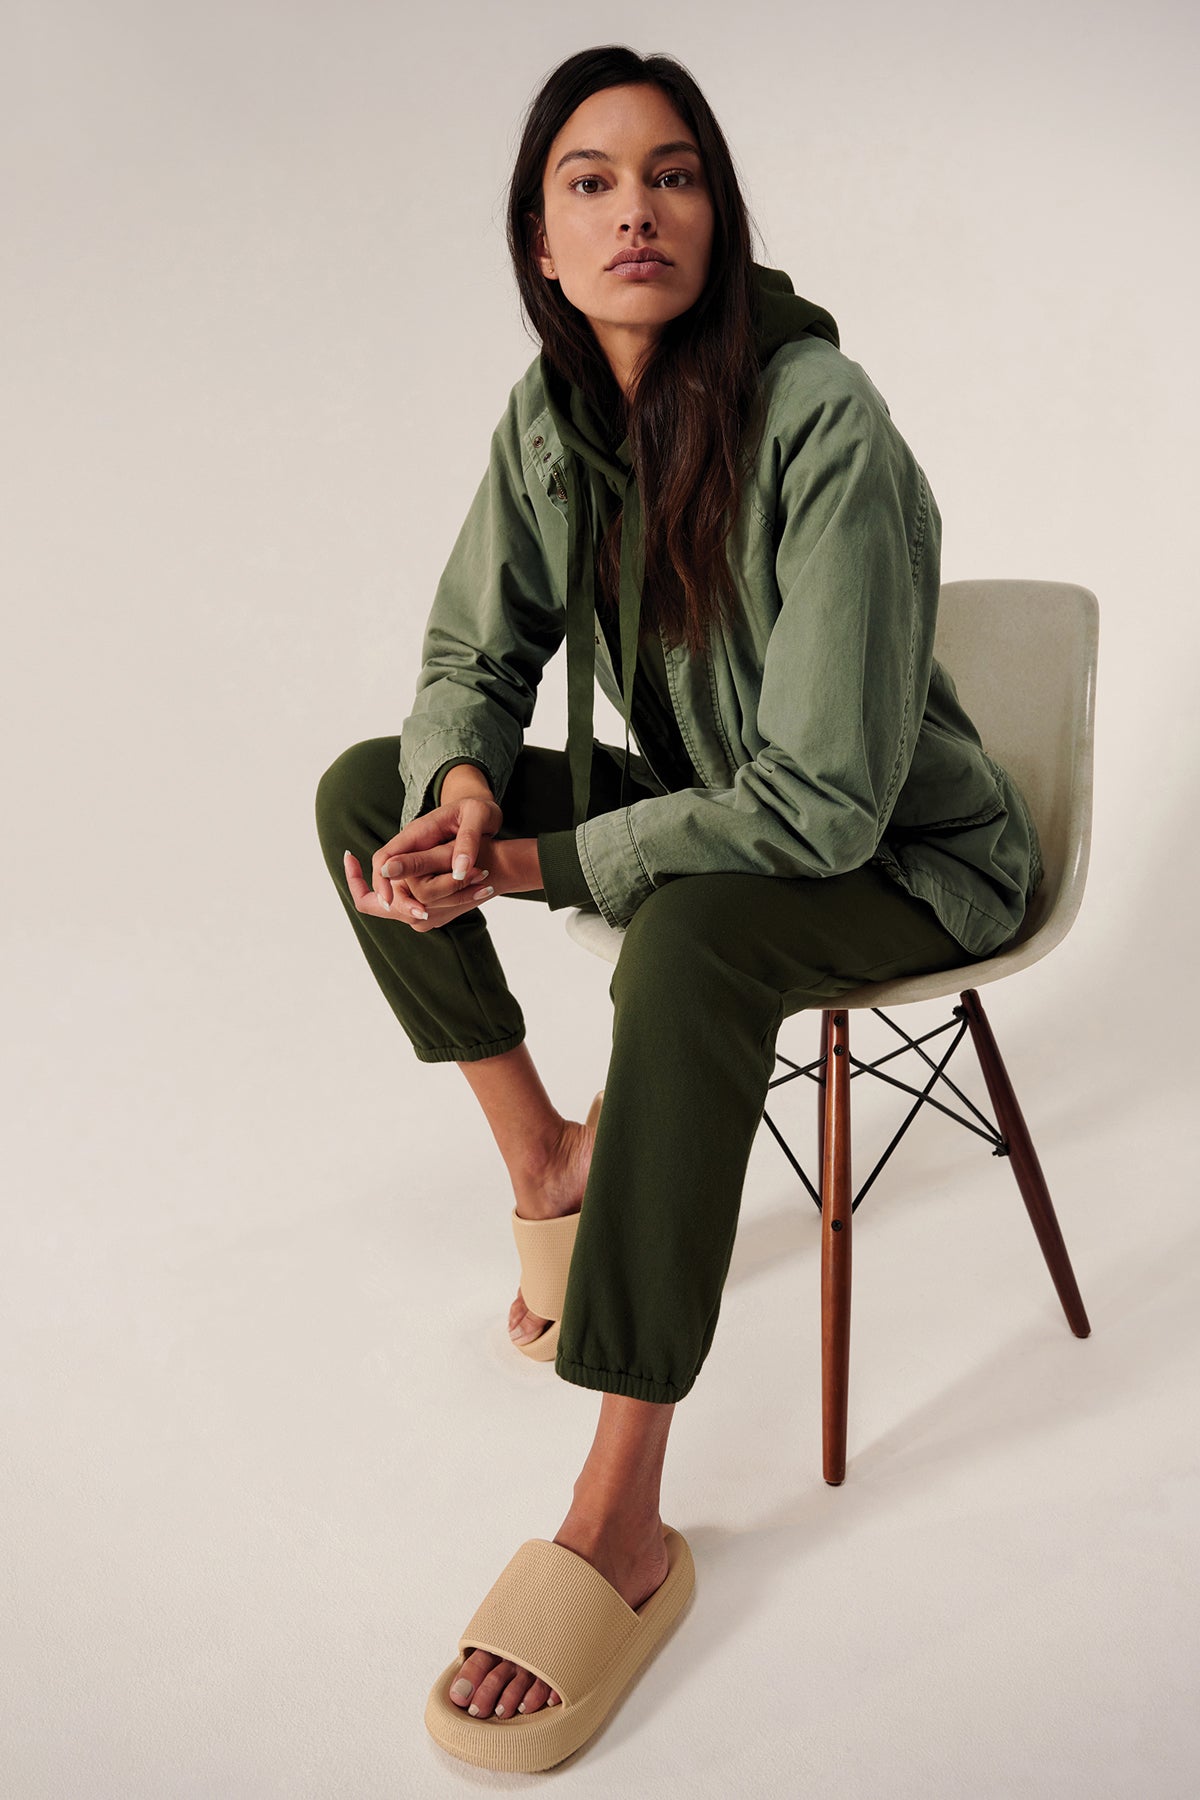 A model is sitting on a chair in a Velvet by Jenny Graham Melrose Jacket and sandals.-24344556699841